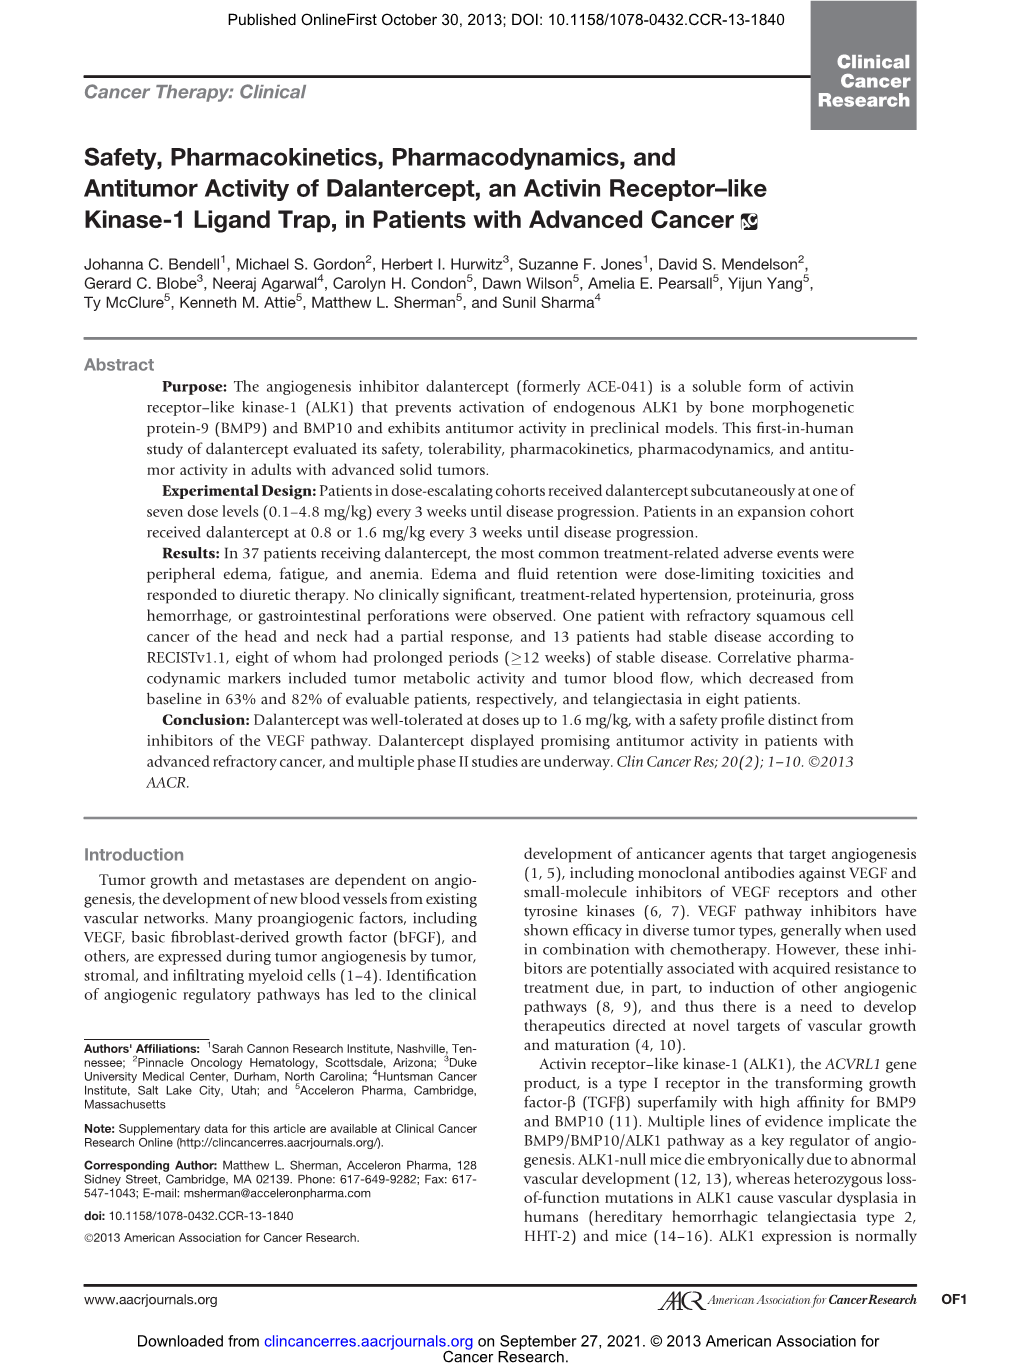 Safety, Pharmacokinetics, Pharmacodynamics, and Antitumor Activity of Dalantercept, an Activin Receptor–Like Kinase-1 Ligand Trap, in Patients with Advanced Cancer